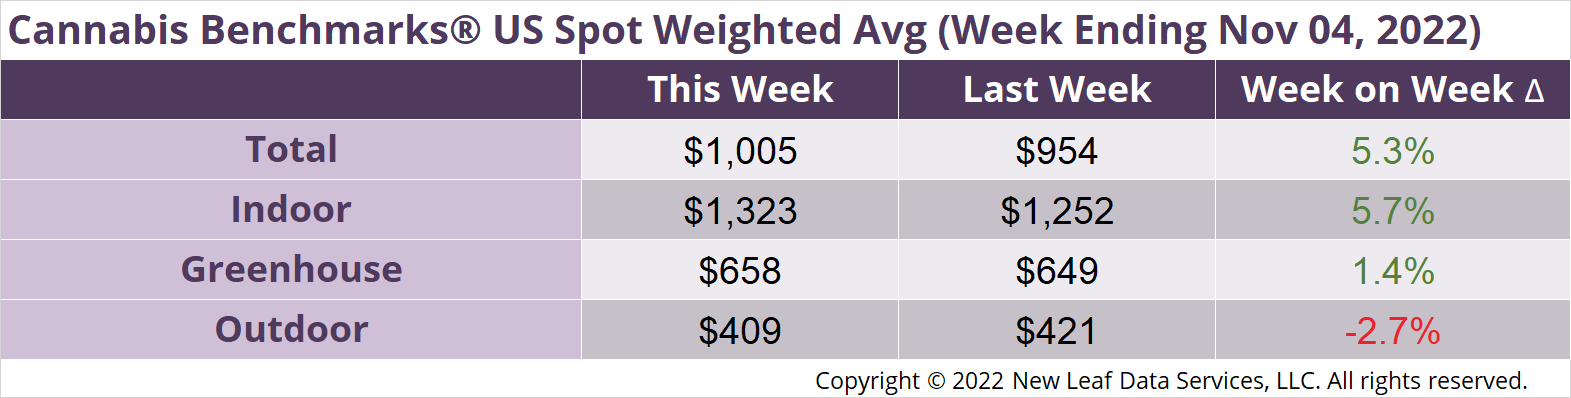 Cannabis Benchmarks U.S. Spot Weighted Average Prices November 4, 2022